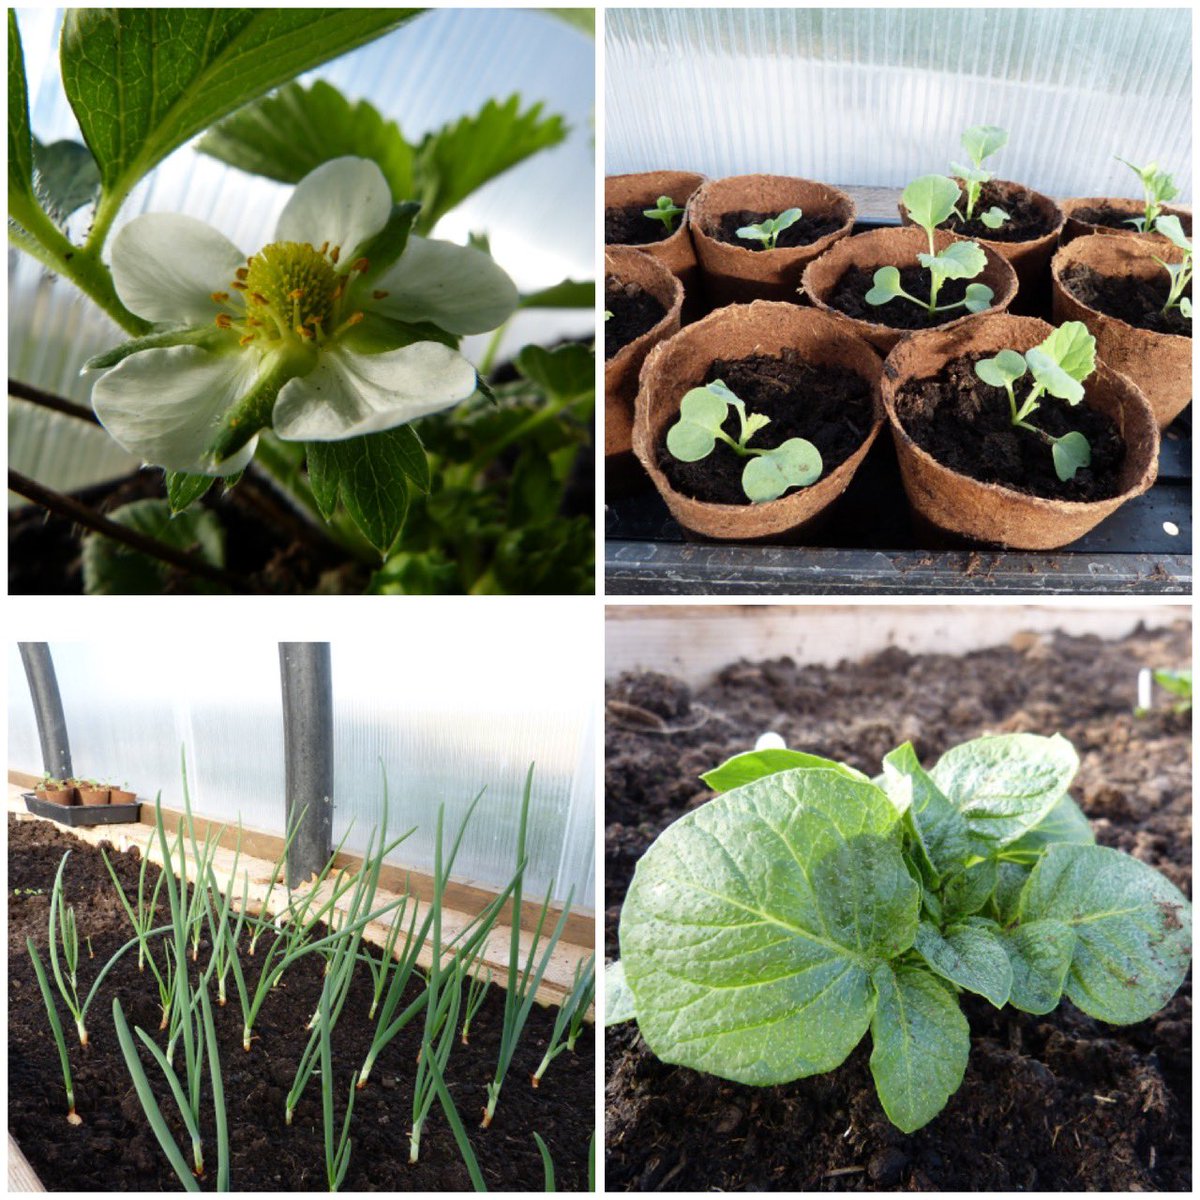 First strawberry flowers, sprouting broccoli and onions doing well and both tatties up…loveing spring in the @polycrub